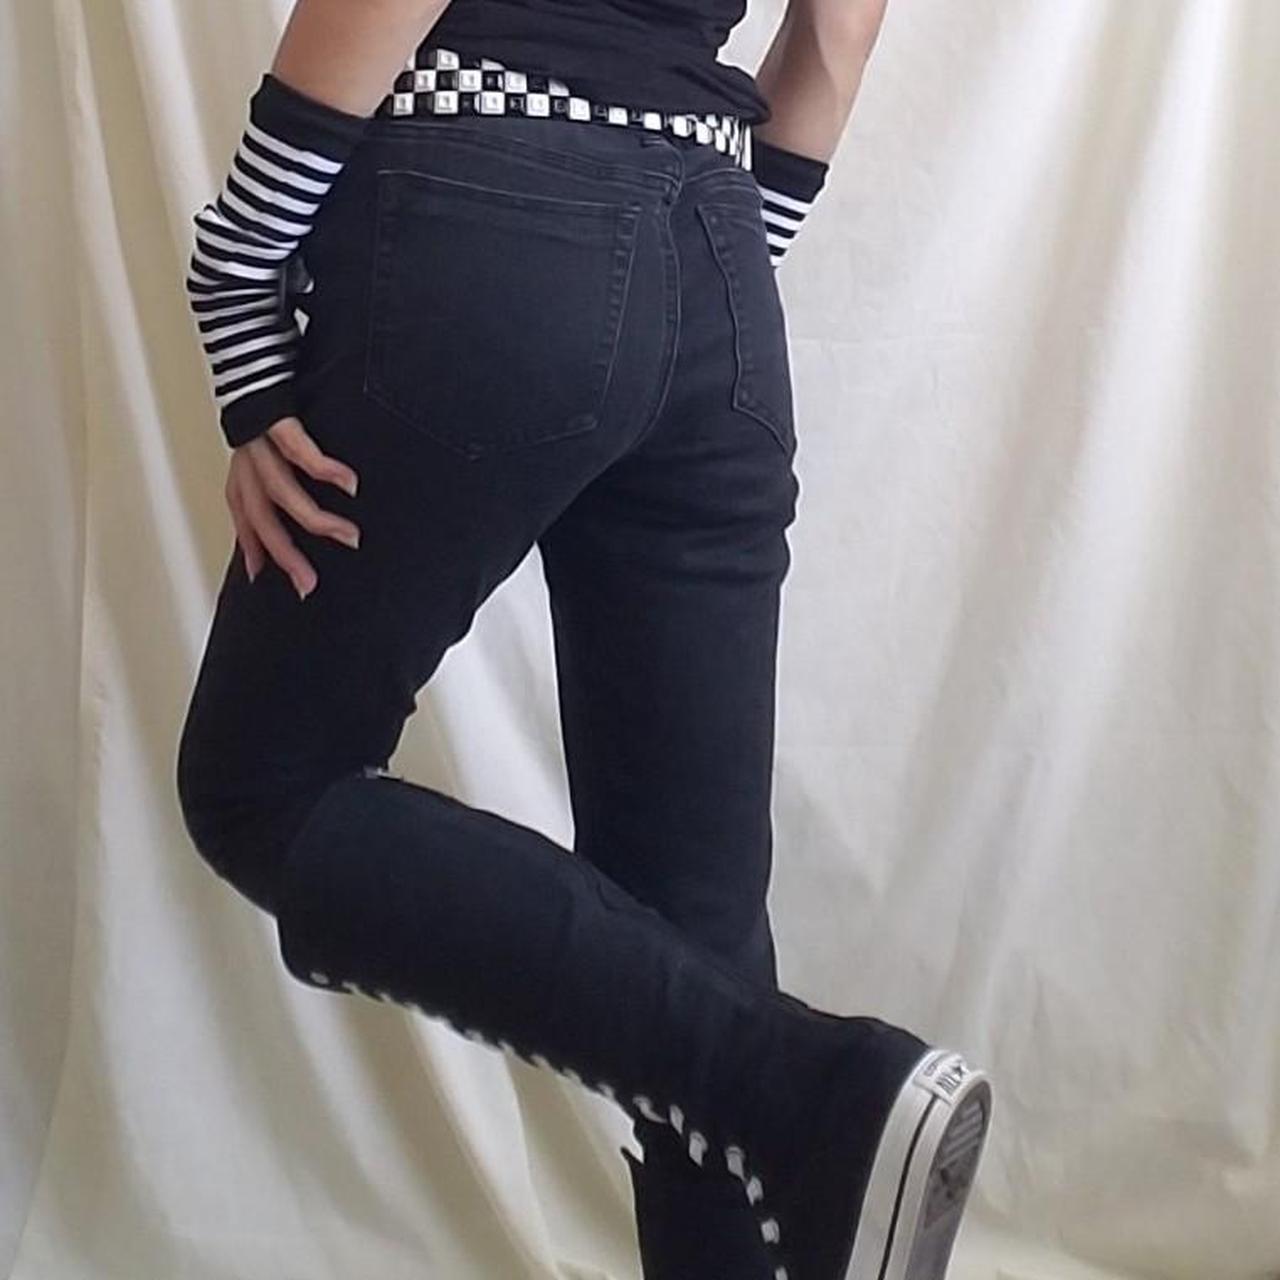 Y2K pullon black Jeggings. From the early 2000's has - Depop